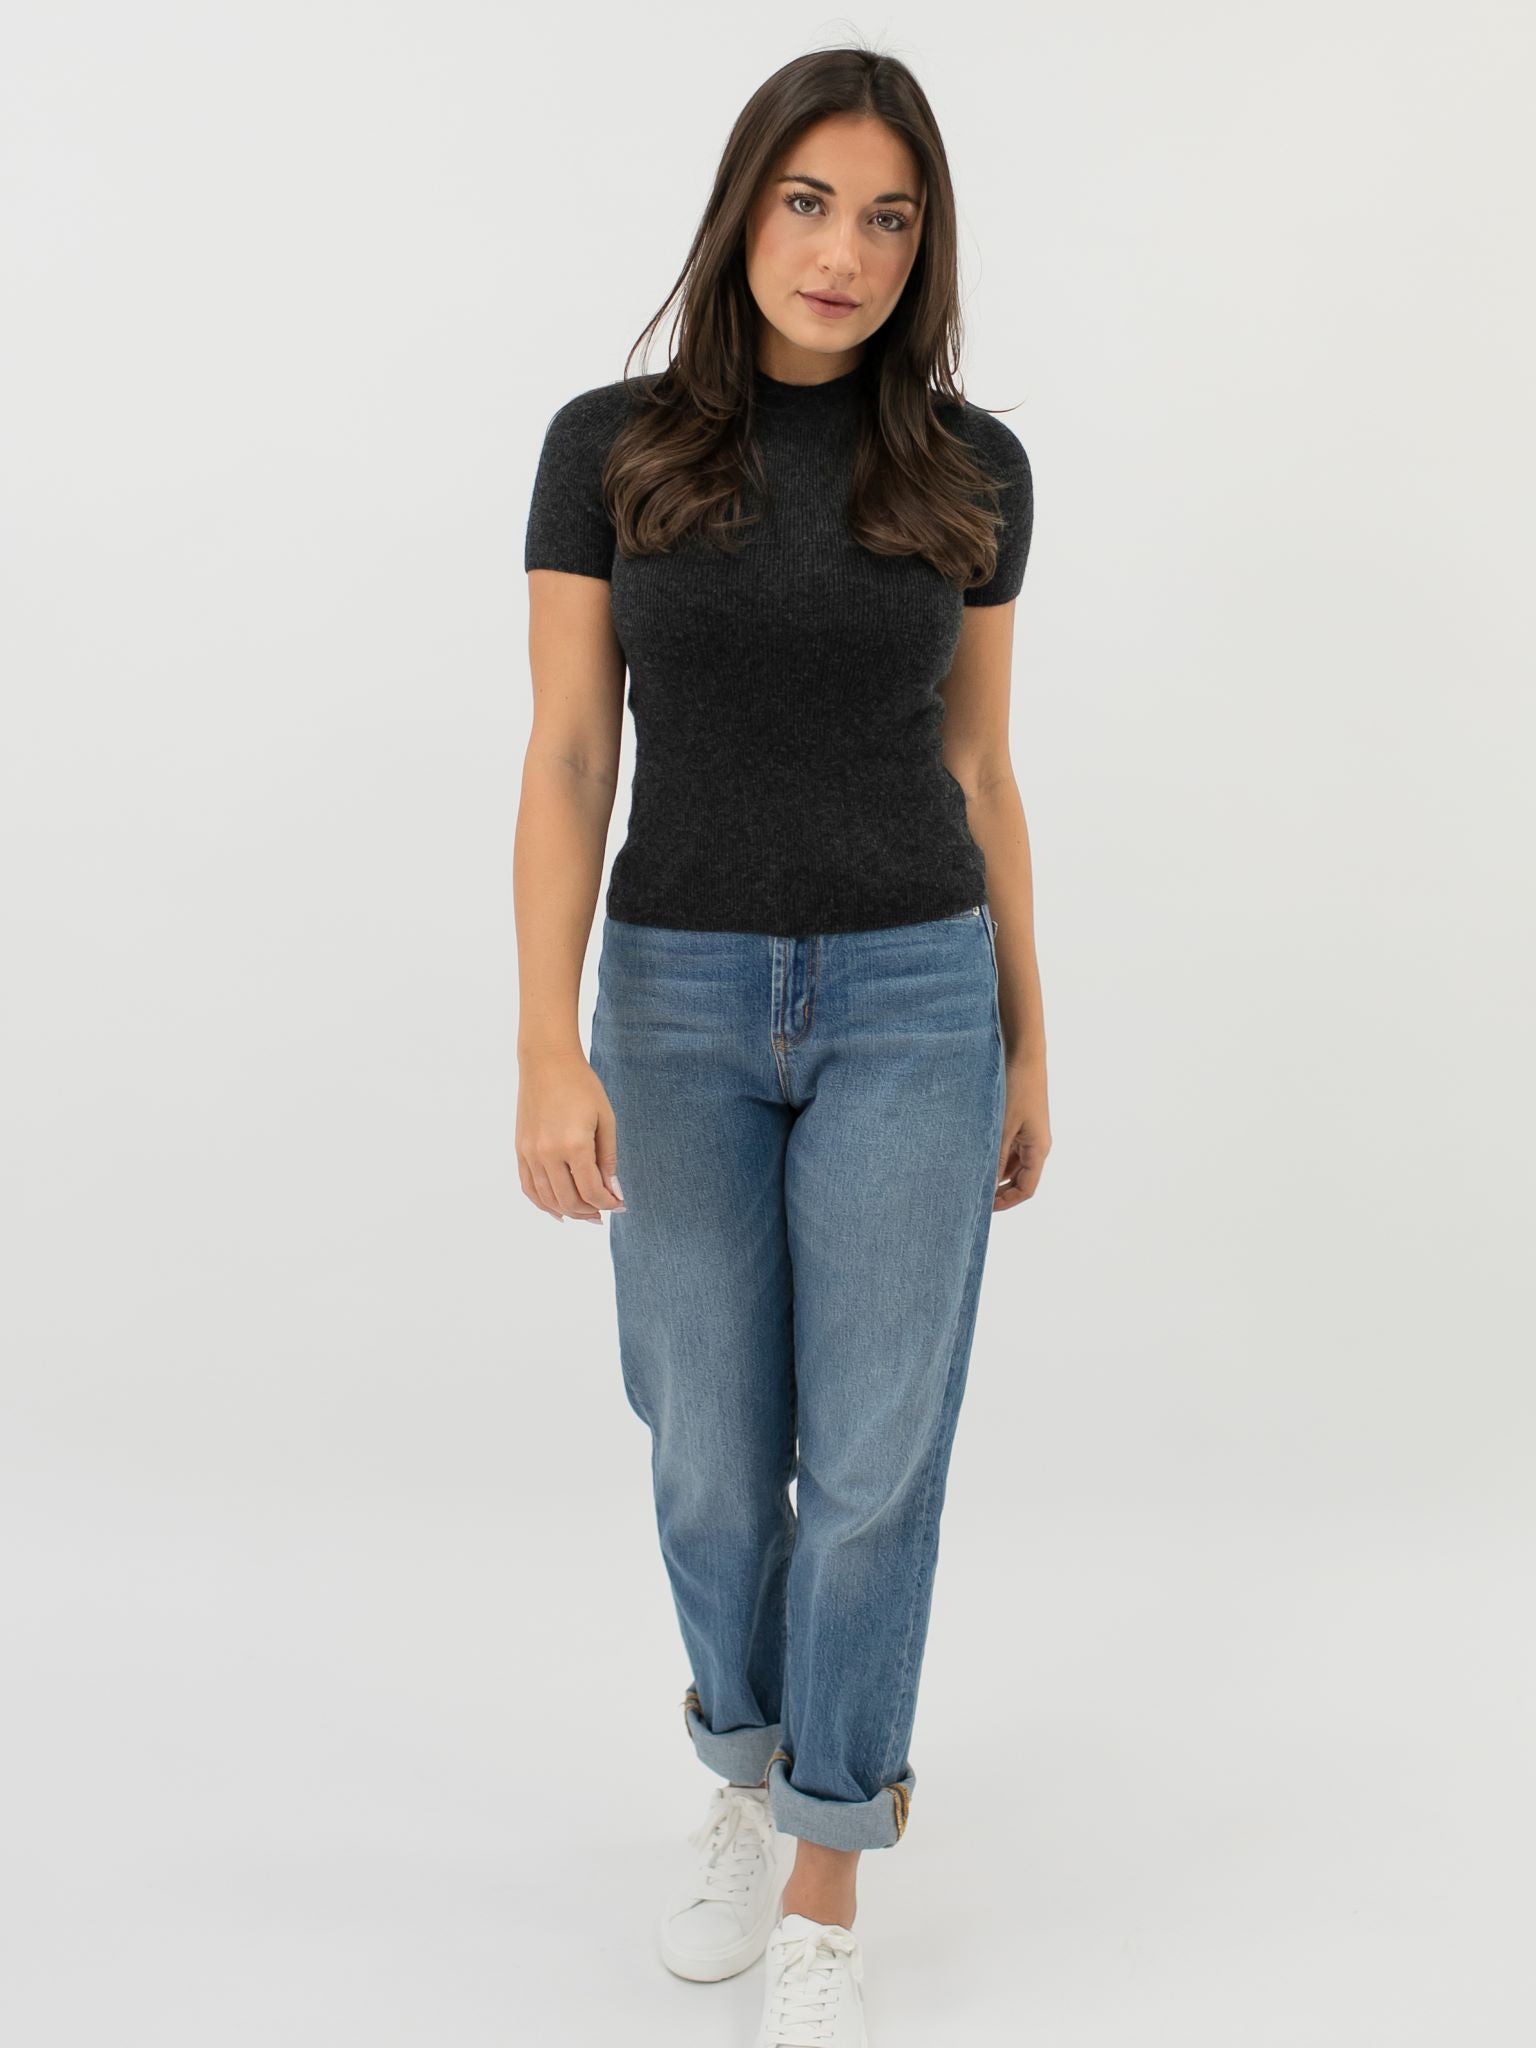 Fitted Cashmere T-Shirt